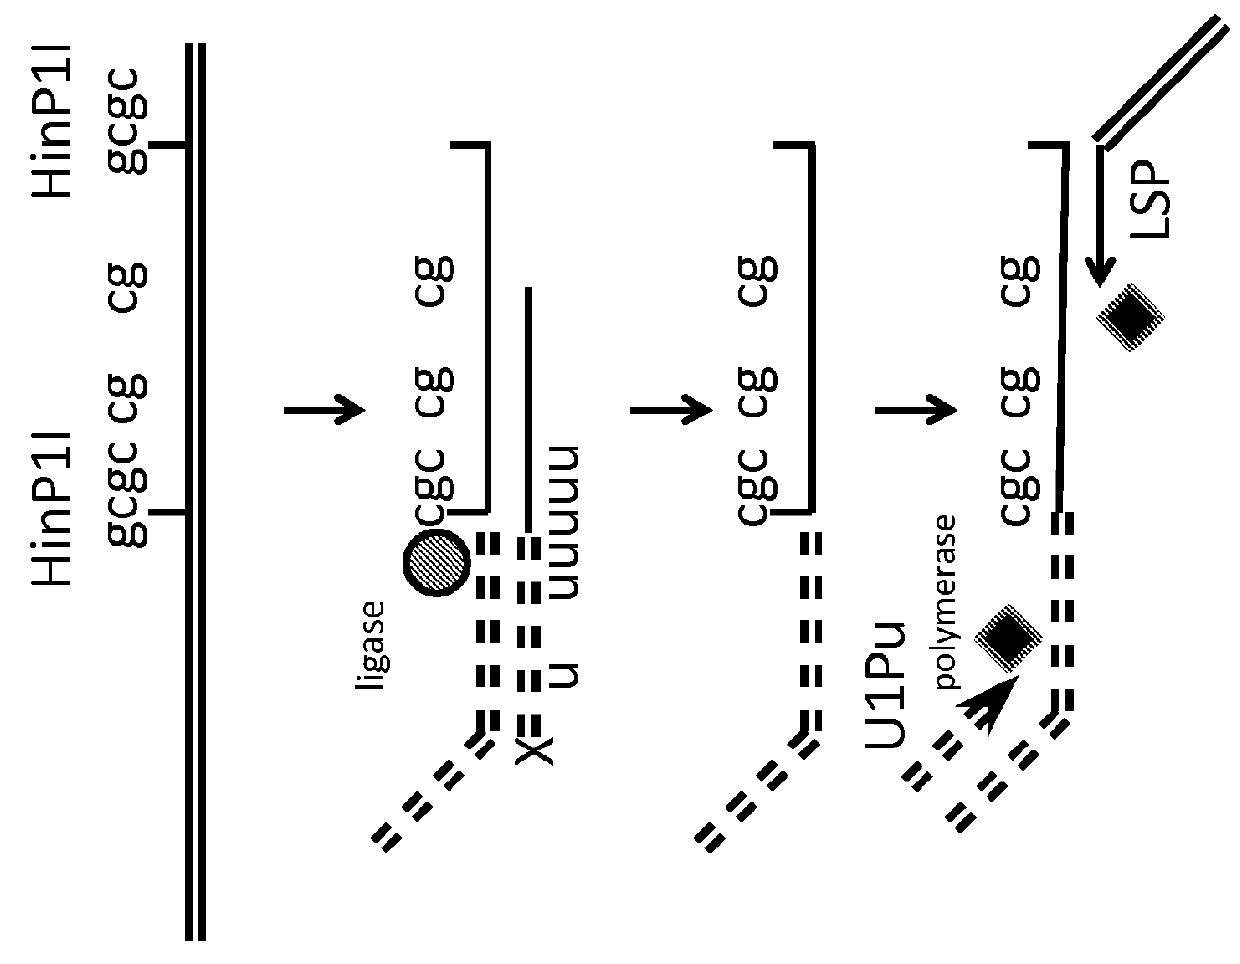 Method for relative quantification of changes in DNA methylation, using combined nuclease, ligation, and polymerase reactions